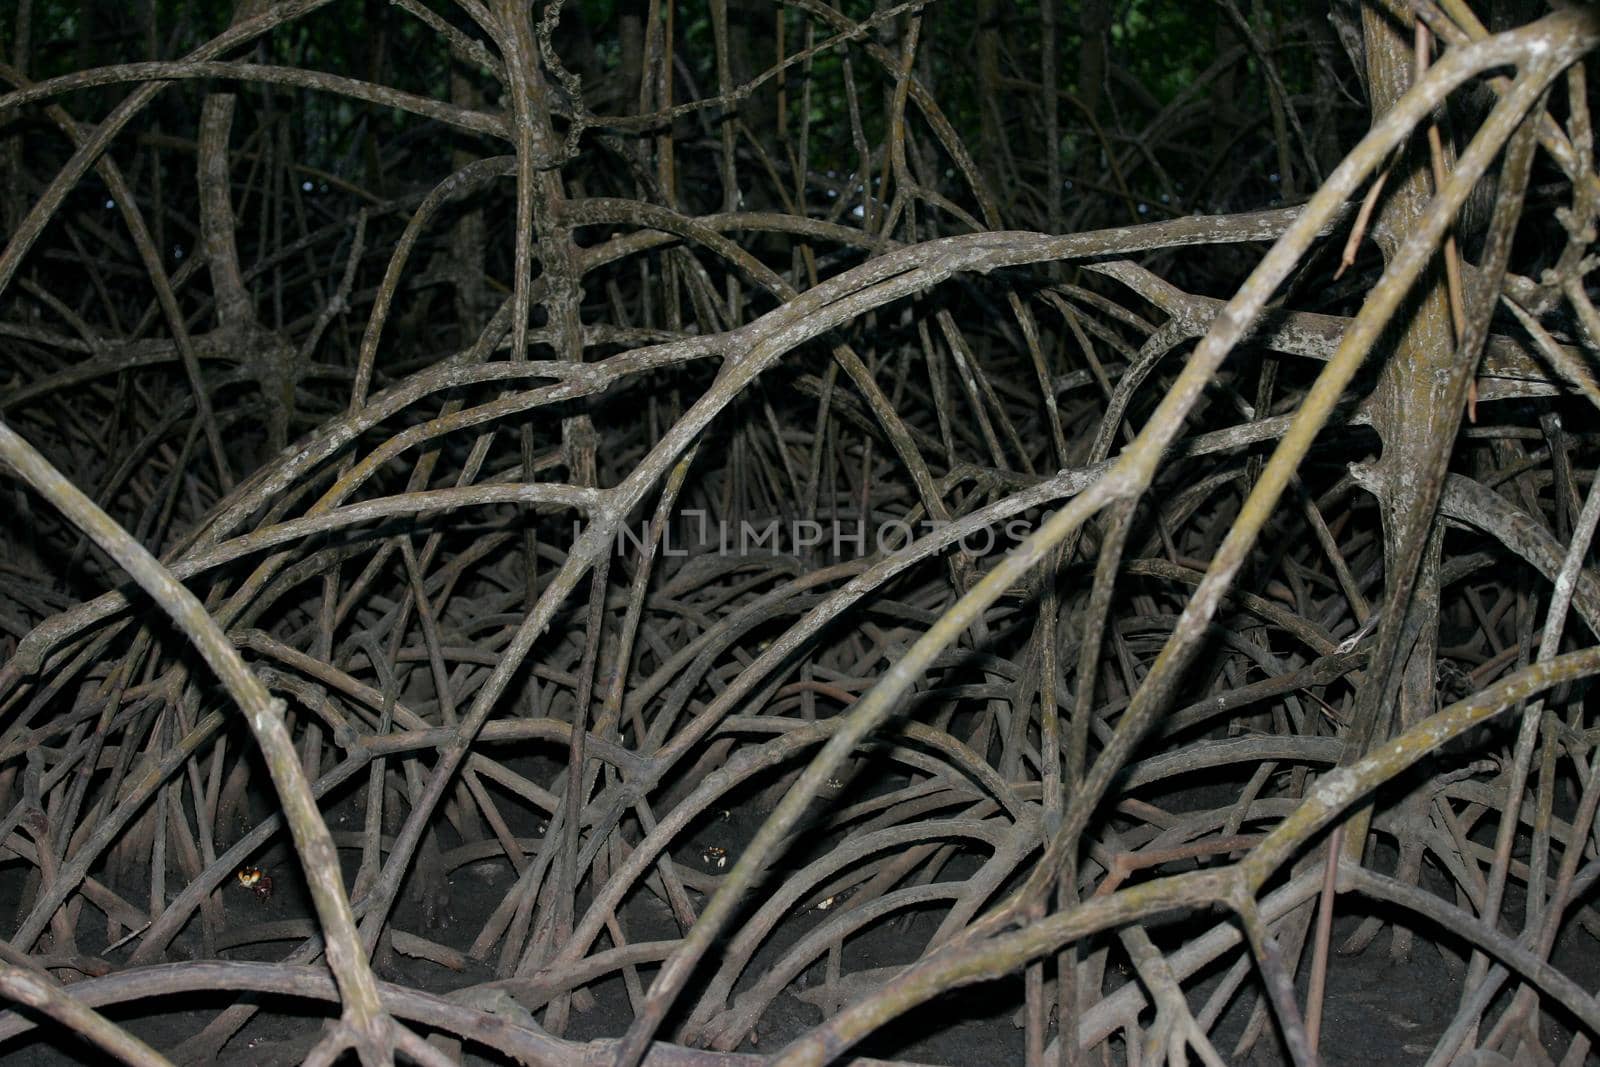  mangrove roots in the city of conde by joasouza